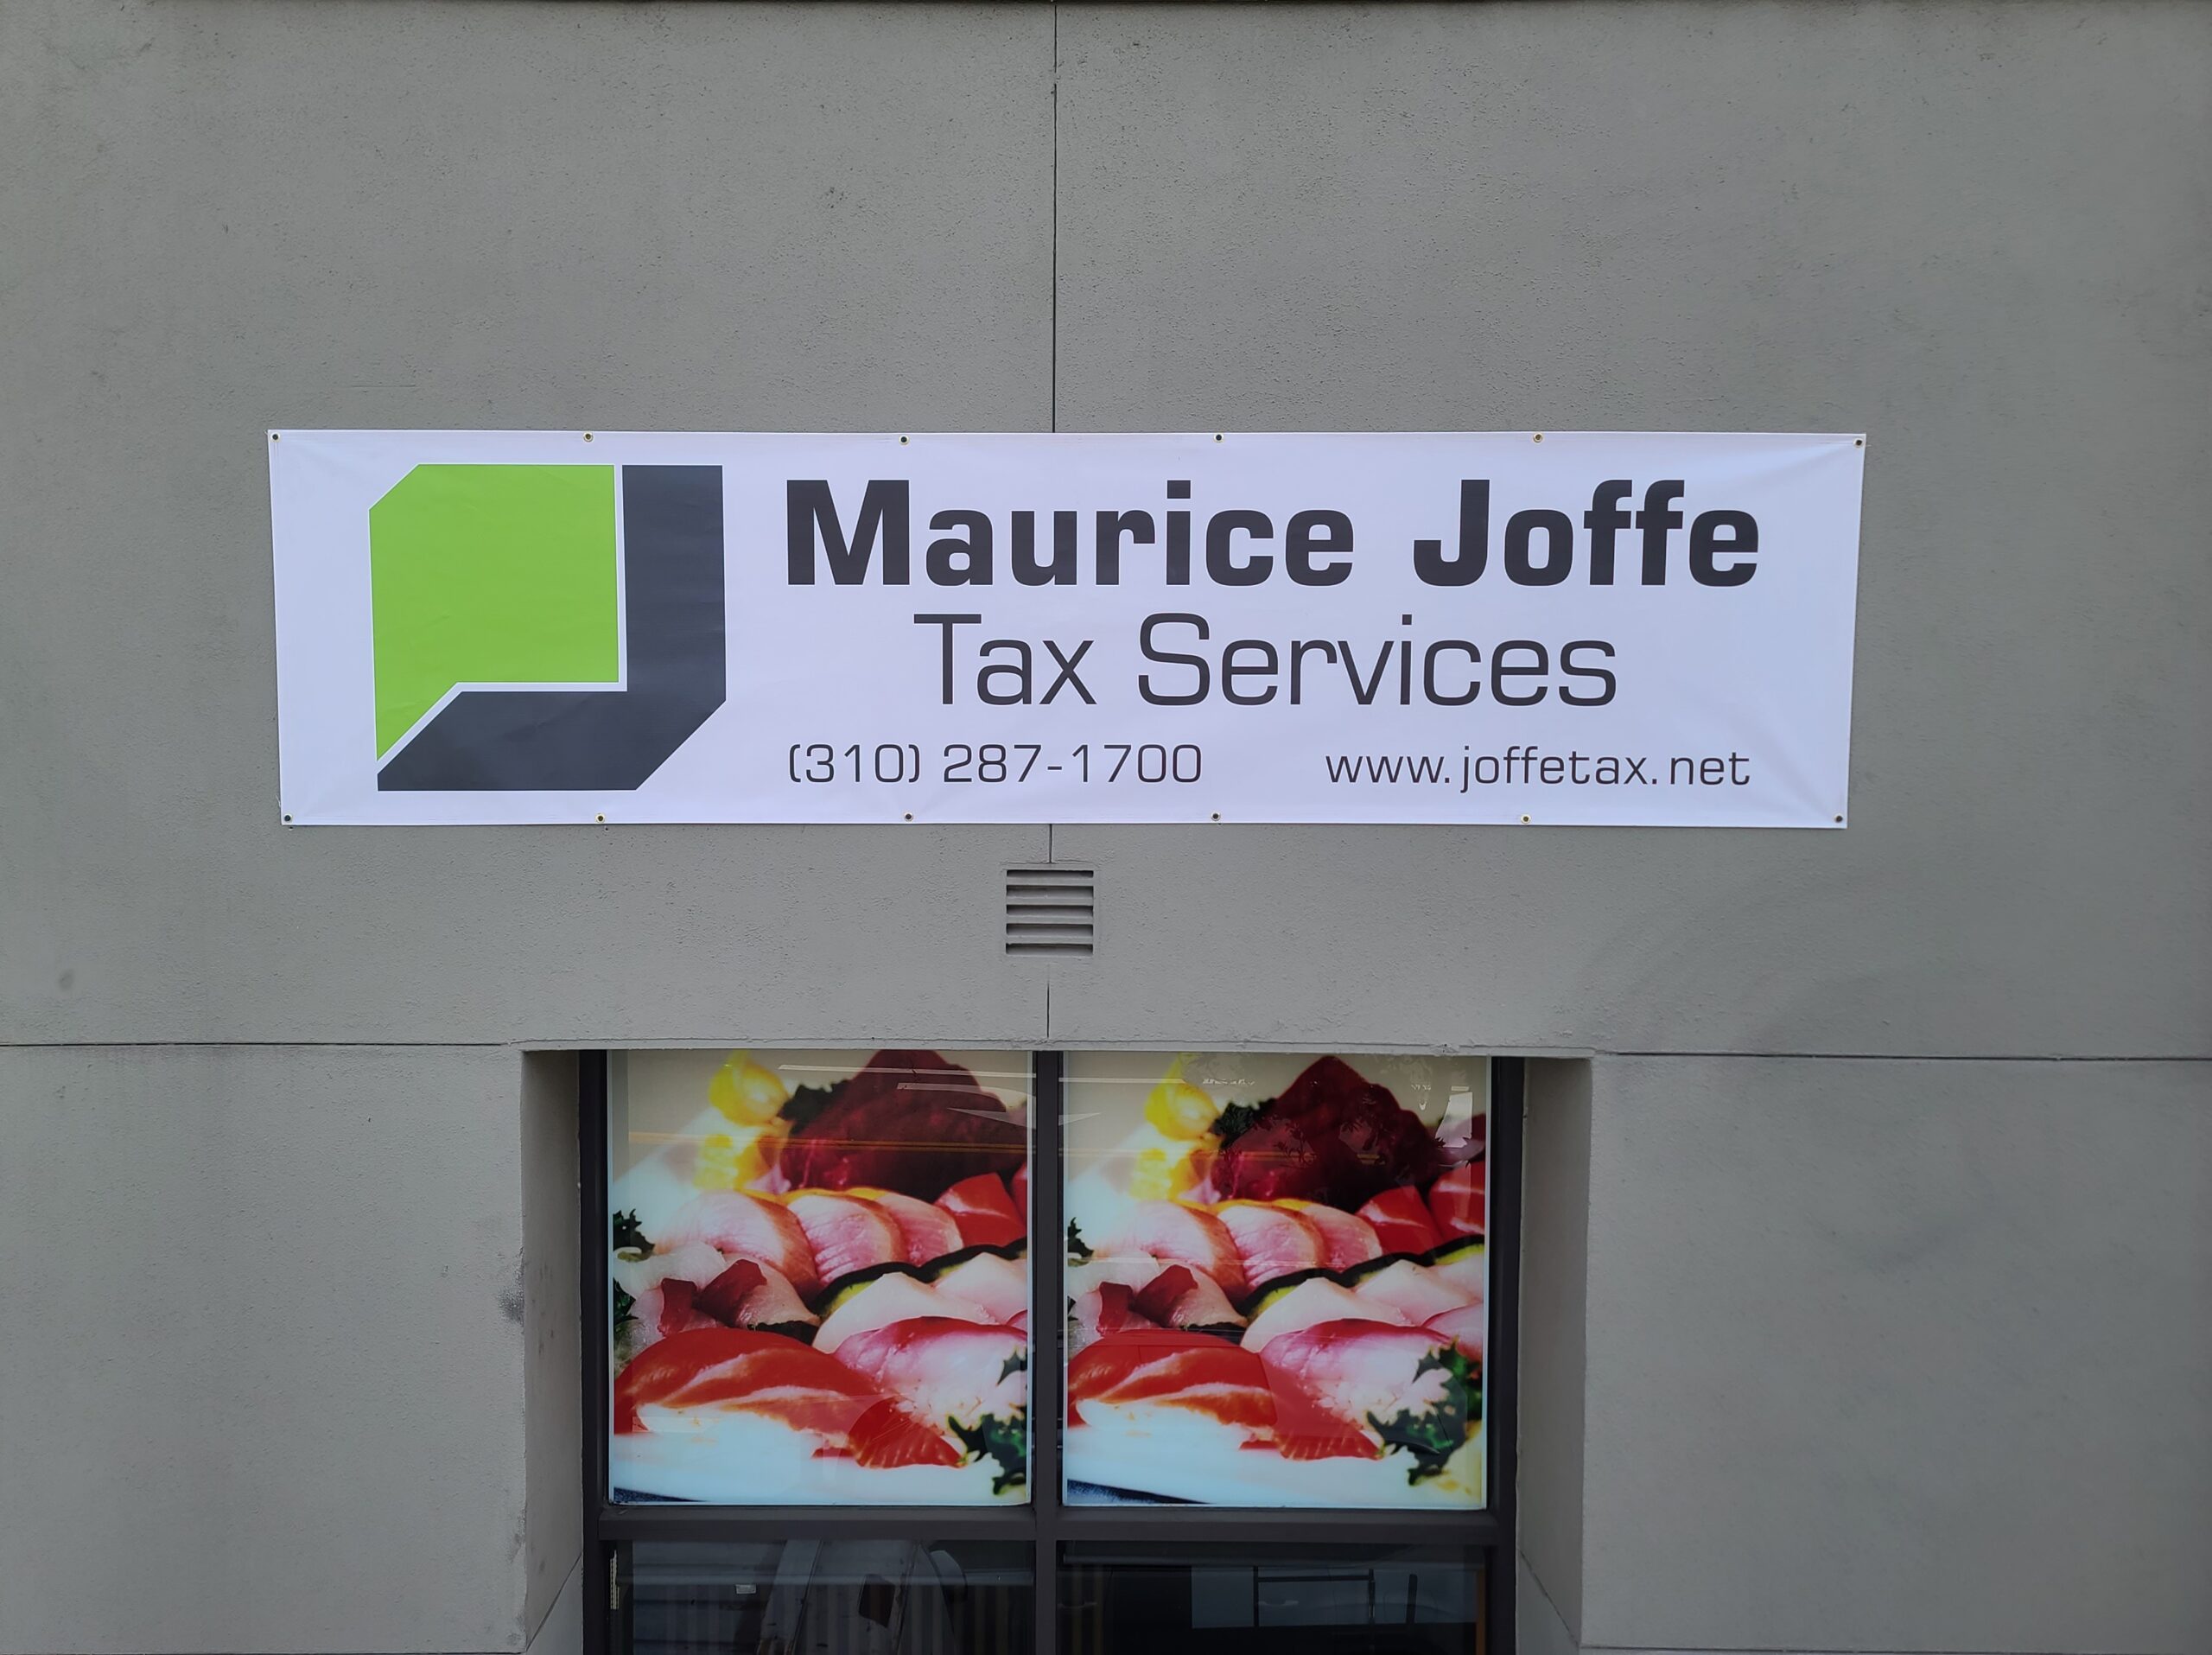 This custom banner for Maurice Joffe Tax Services in Los Angeles displays their company name, brand logo, as well as contact details.